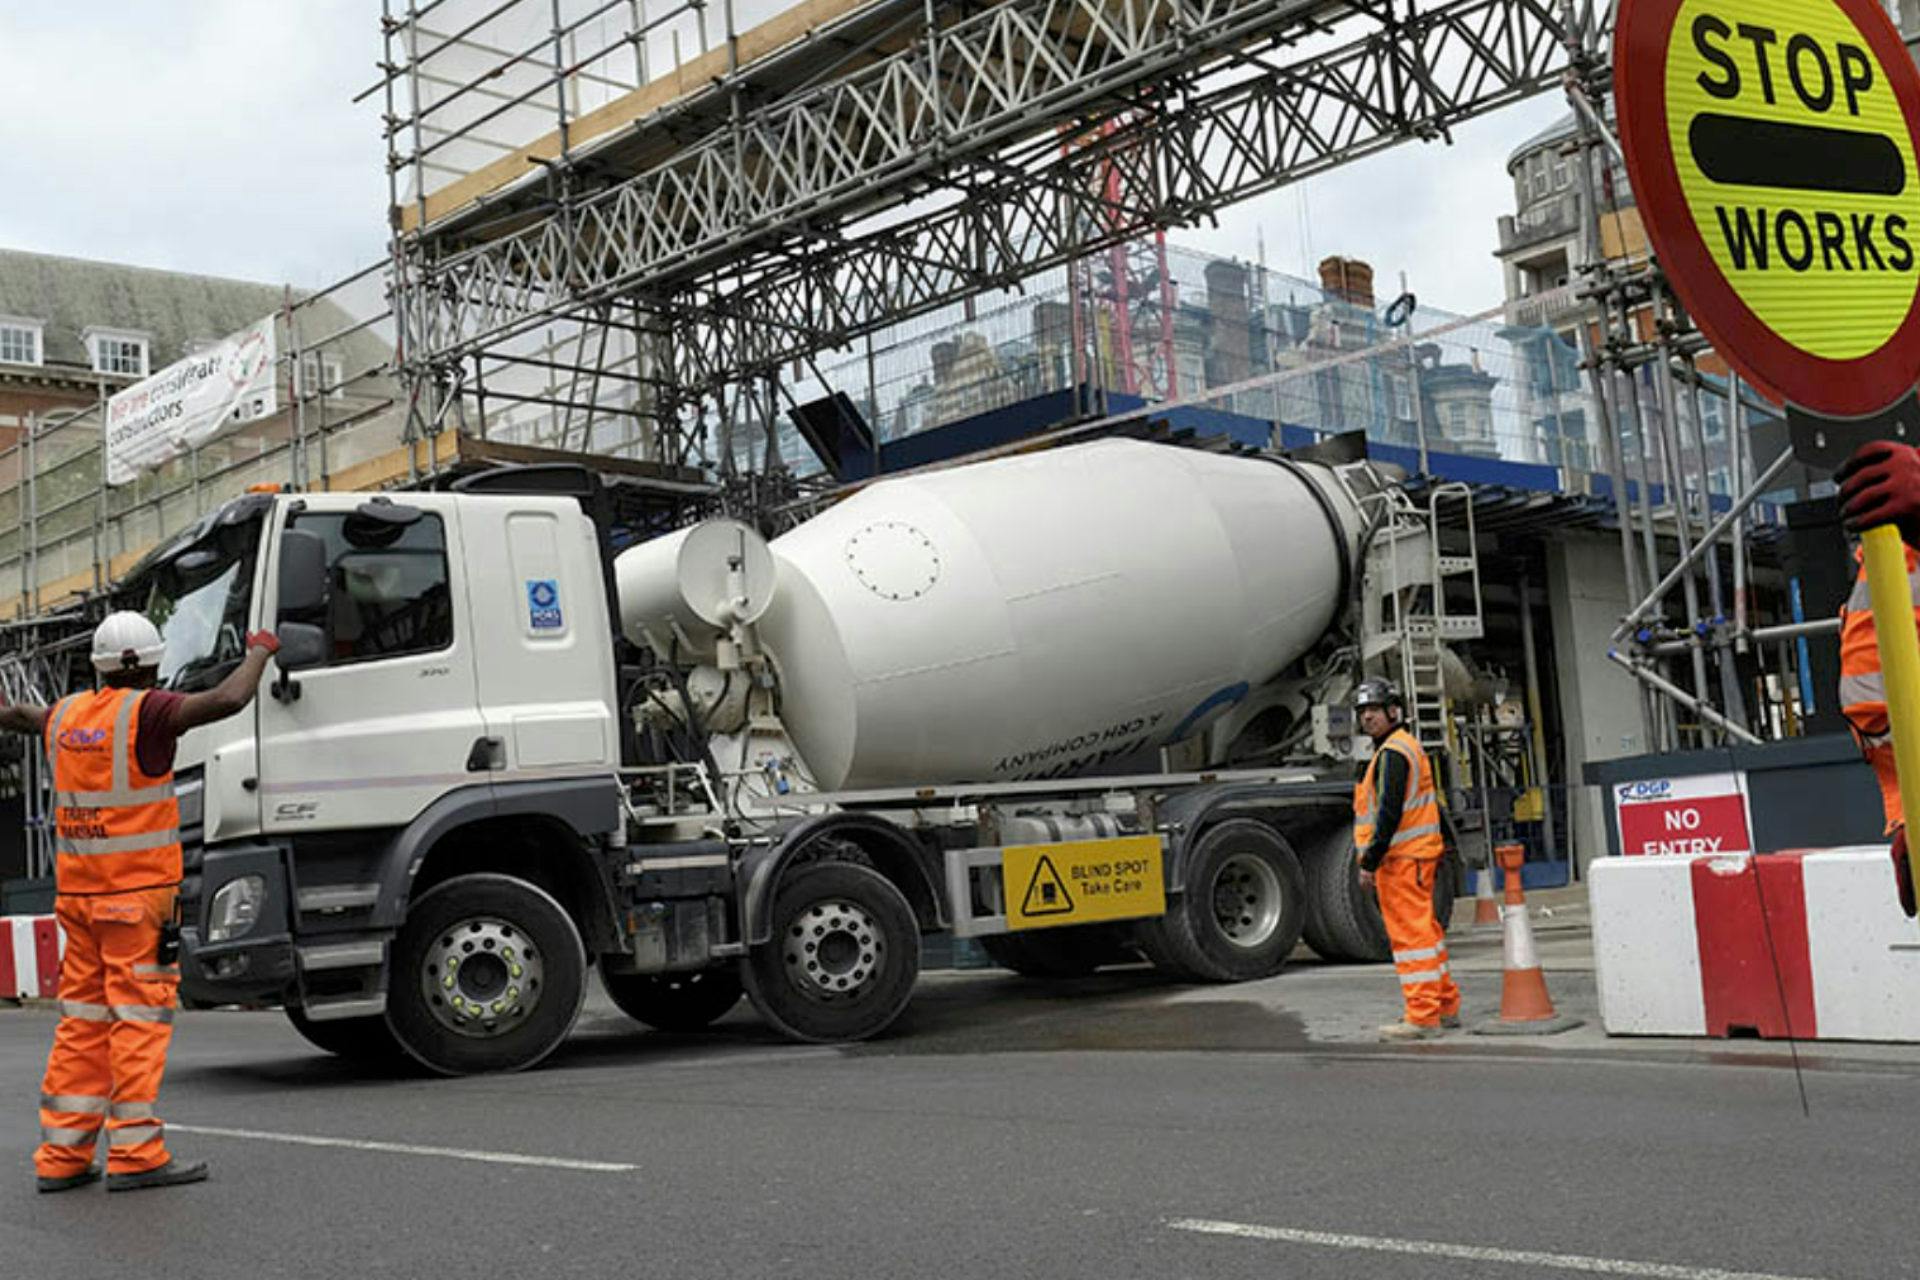 Lorry exiting a building site with workmen guiding them out and stopping traffic